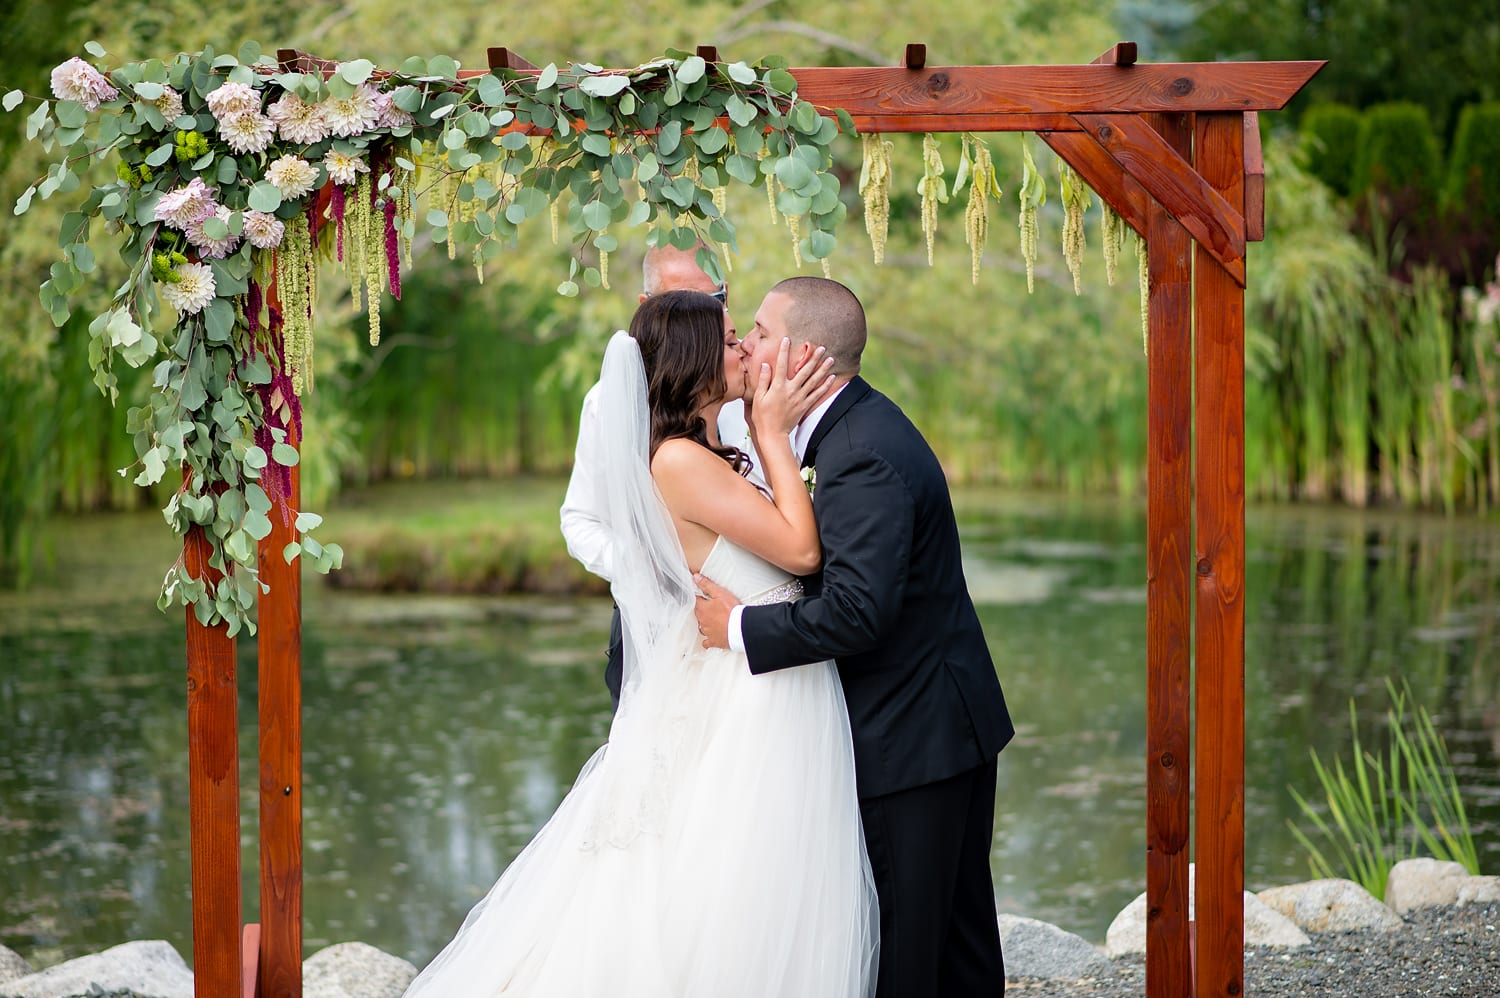 First Kiss at Axton Events Bellingham wedding venue